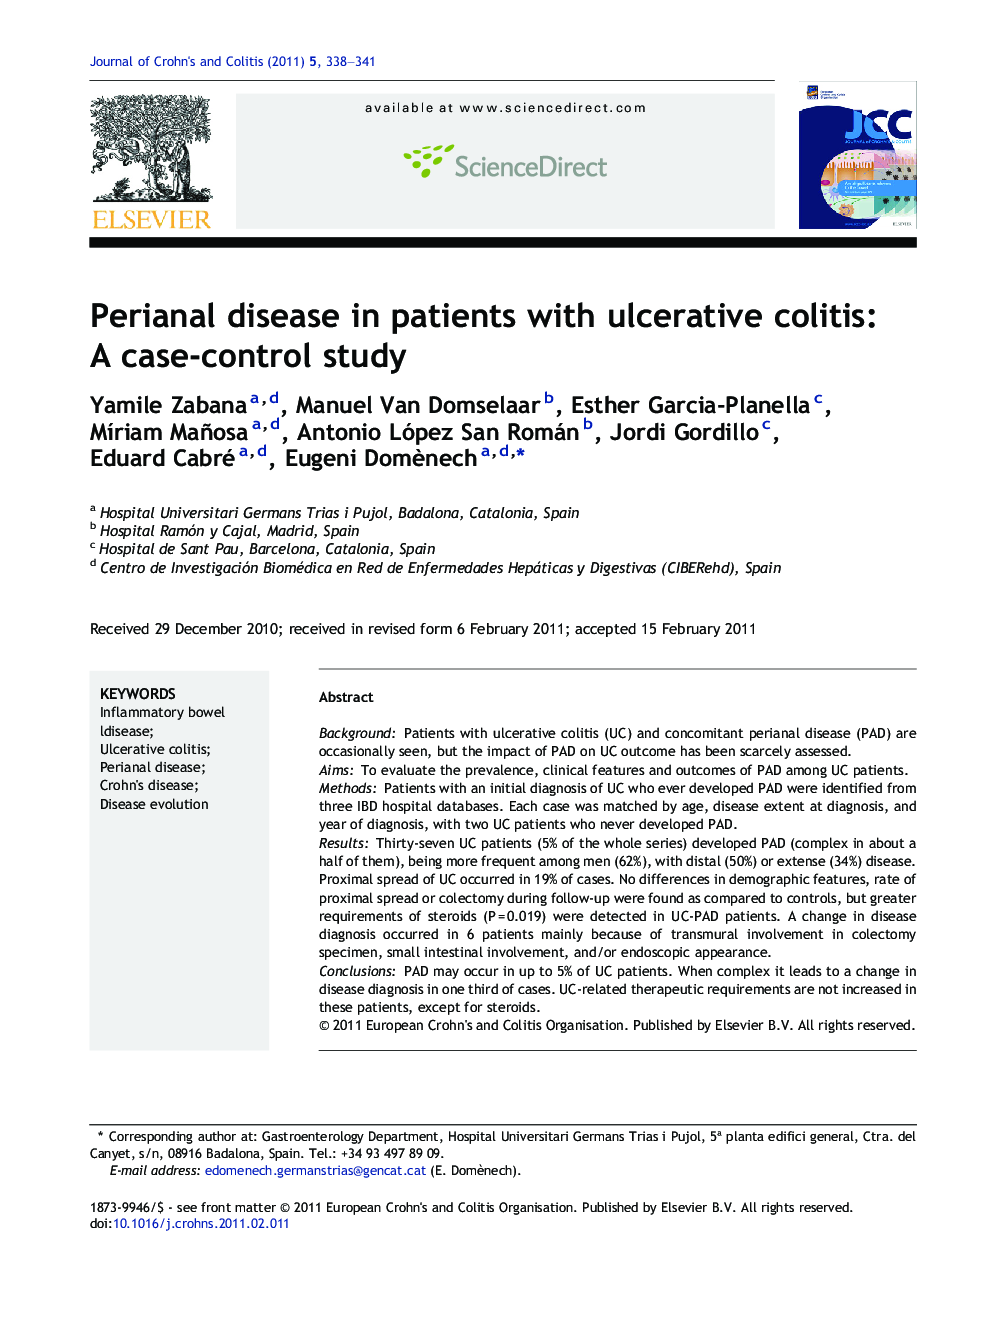 Perianal disease in patients with ulcerative colitis: A case-control study